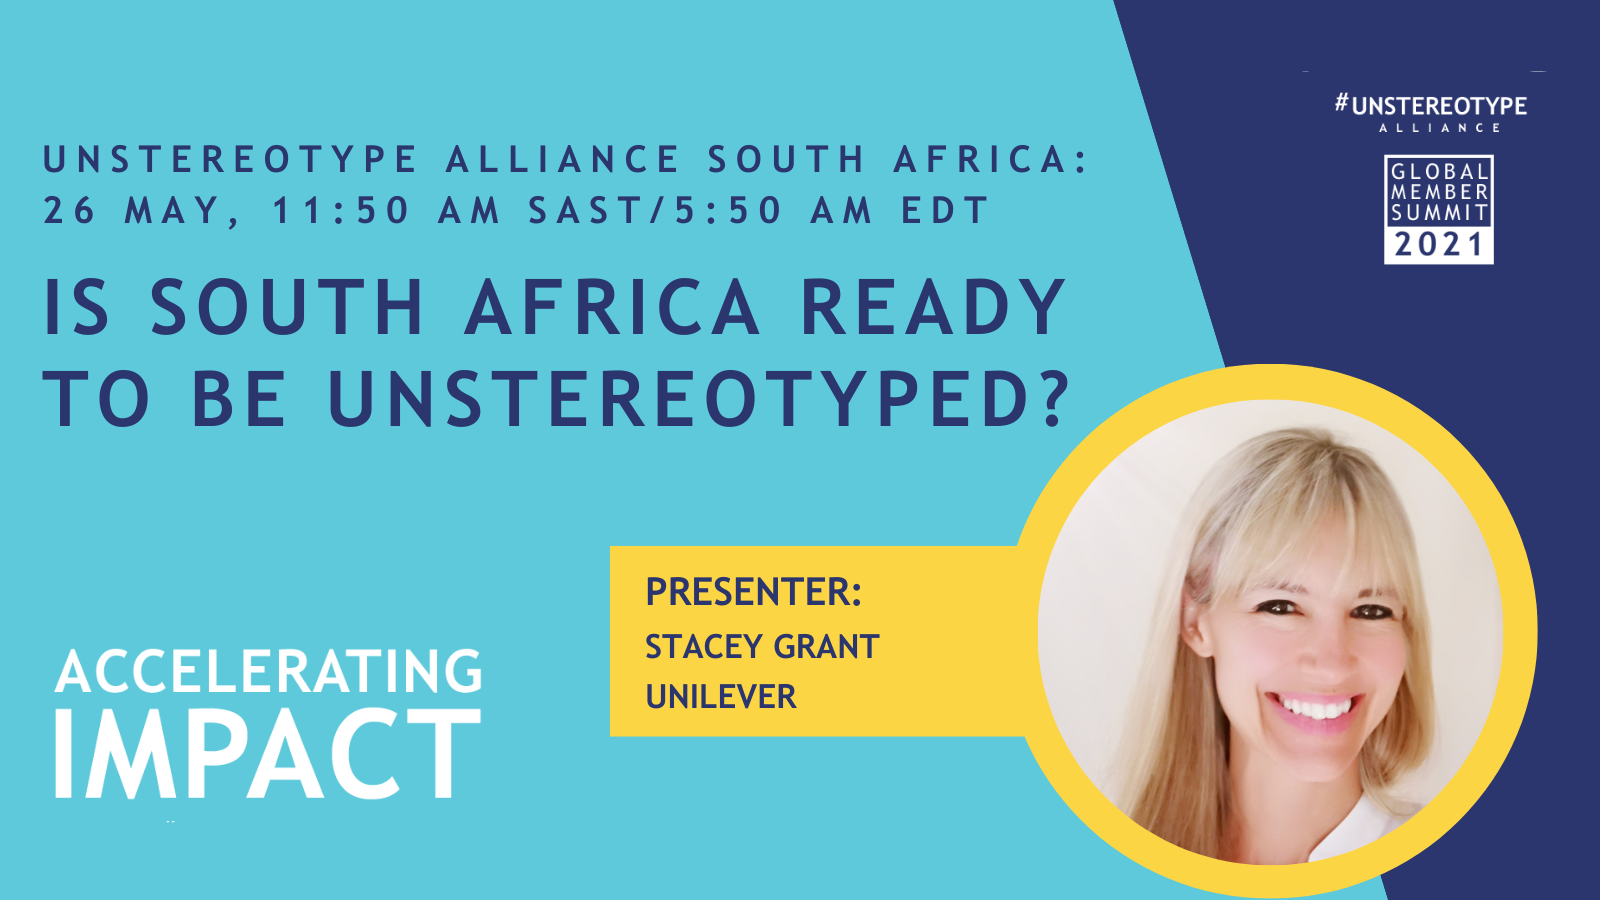 Stacey Grant, Unilever - Is South Africa Ready to Be Unstereotyped?